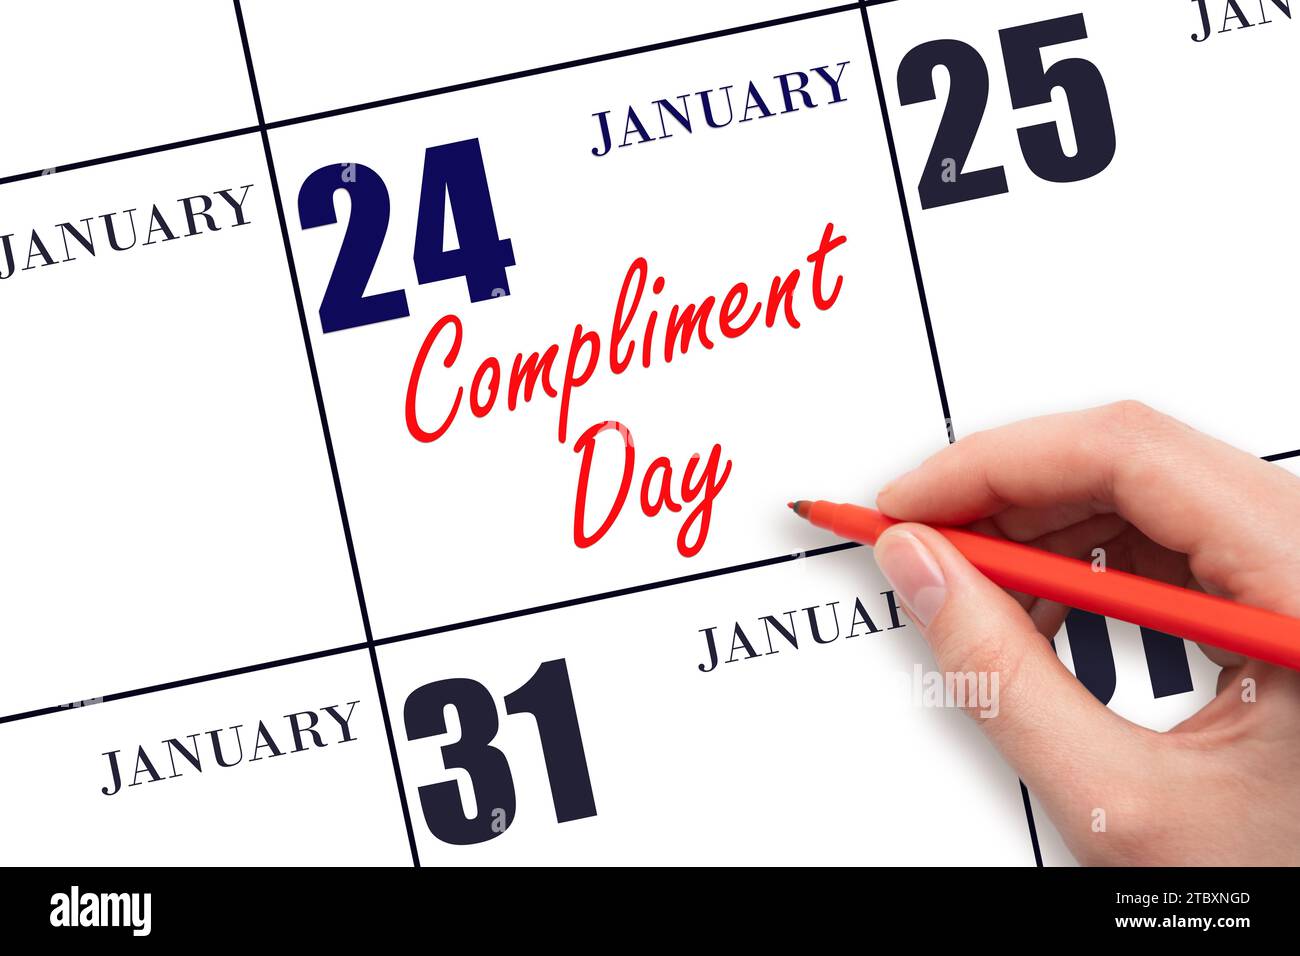 January 24. Hand writing text Compliment Day on calendar date. Save the date. Holiday.  Day of the year concept. Stock Photo